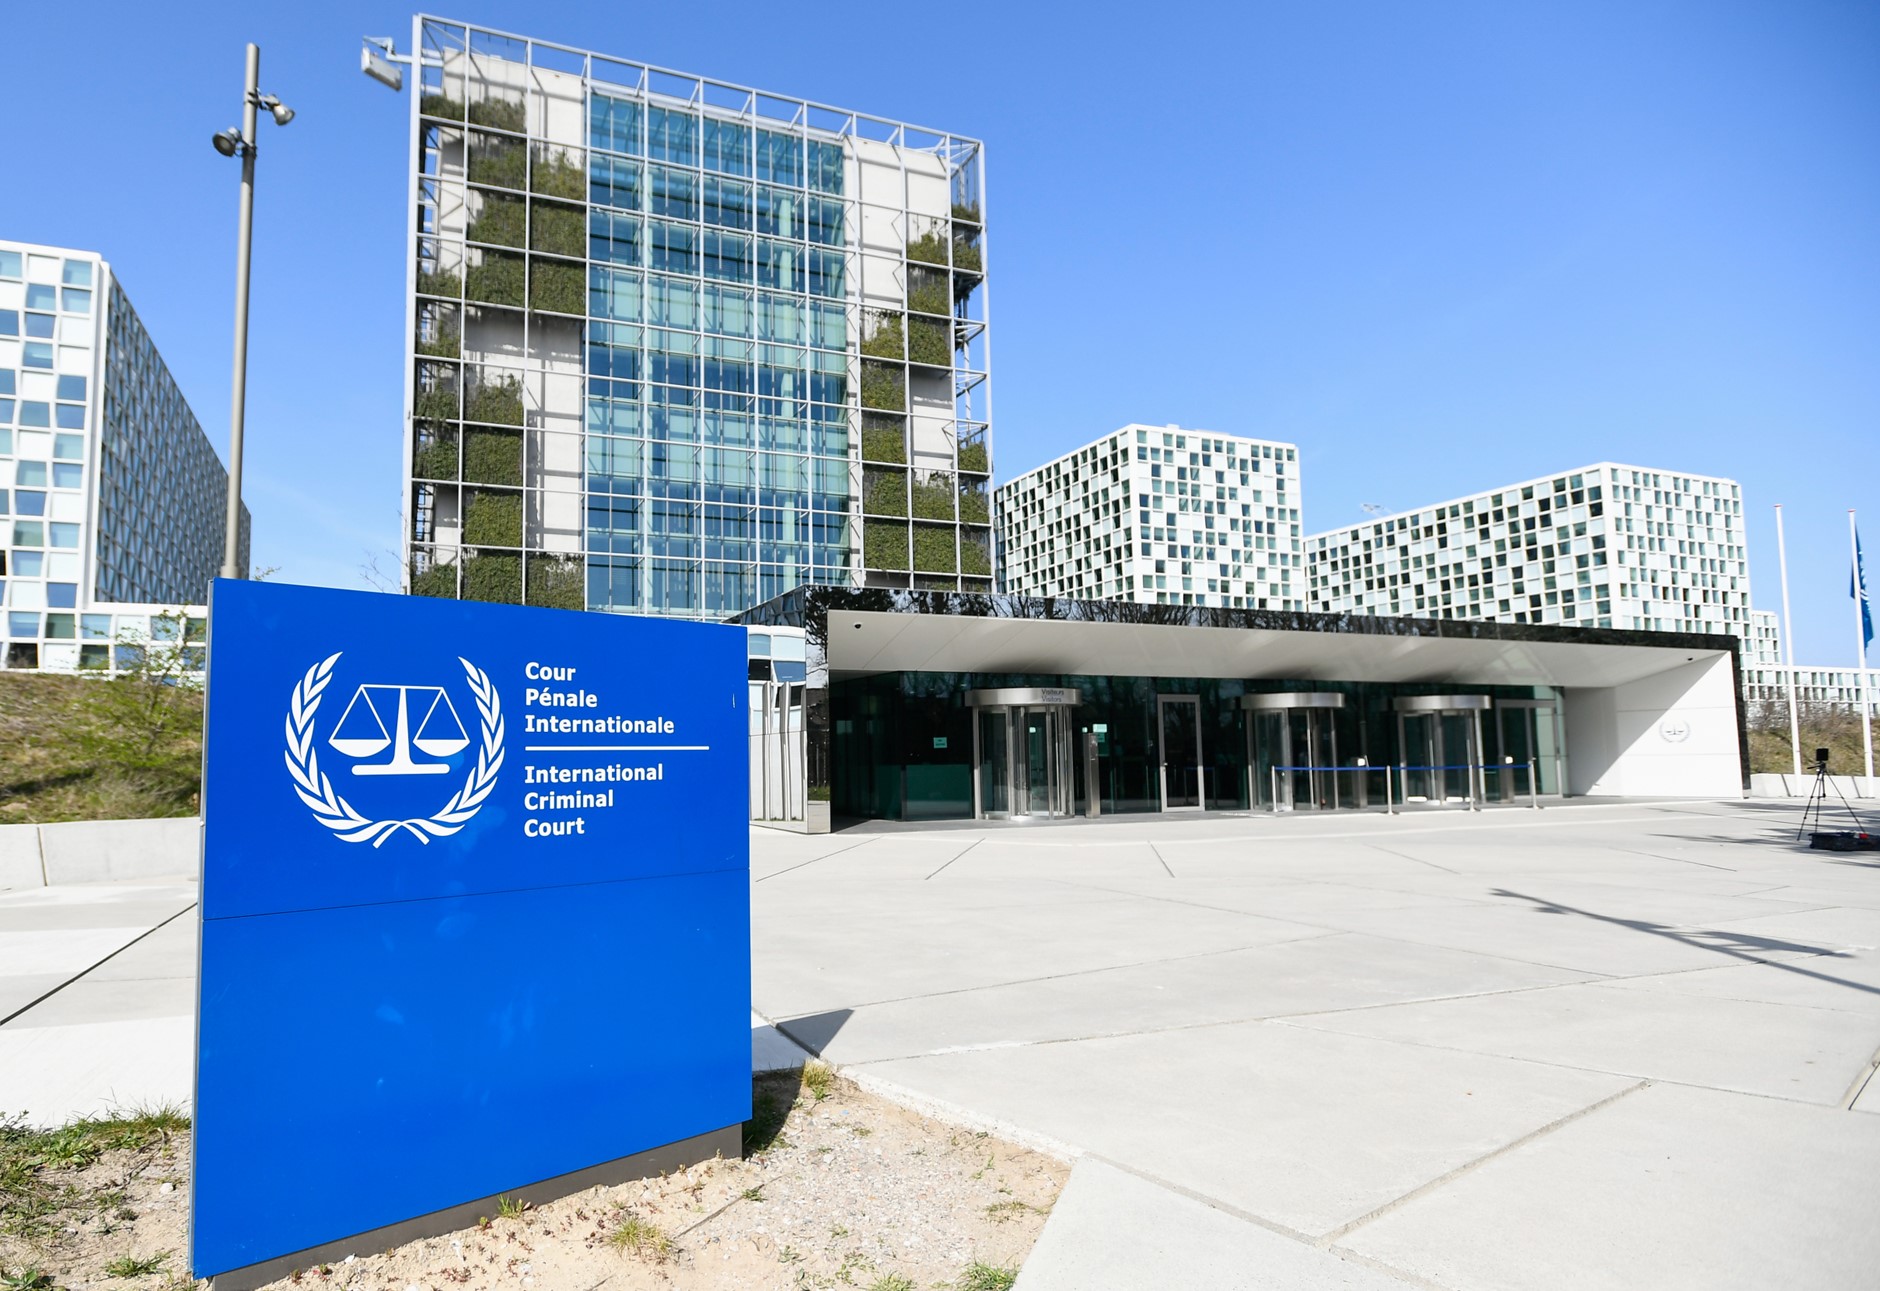 Request for support of ICC investigation in Palestine by African ICC member states